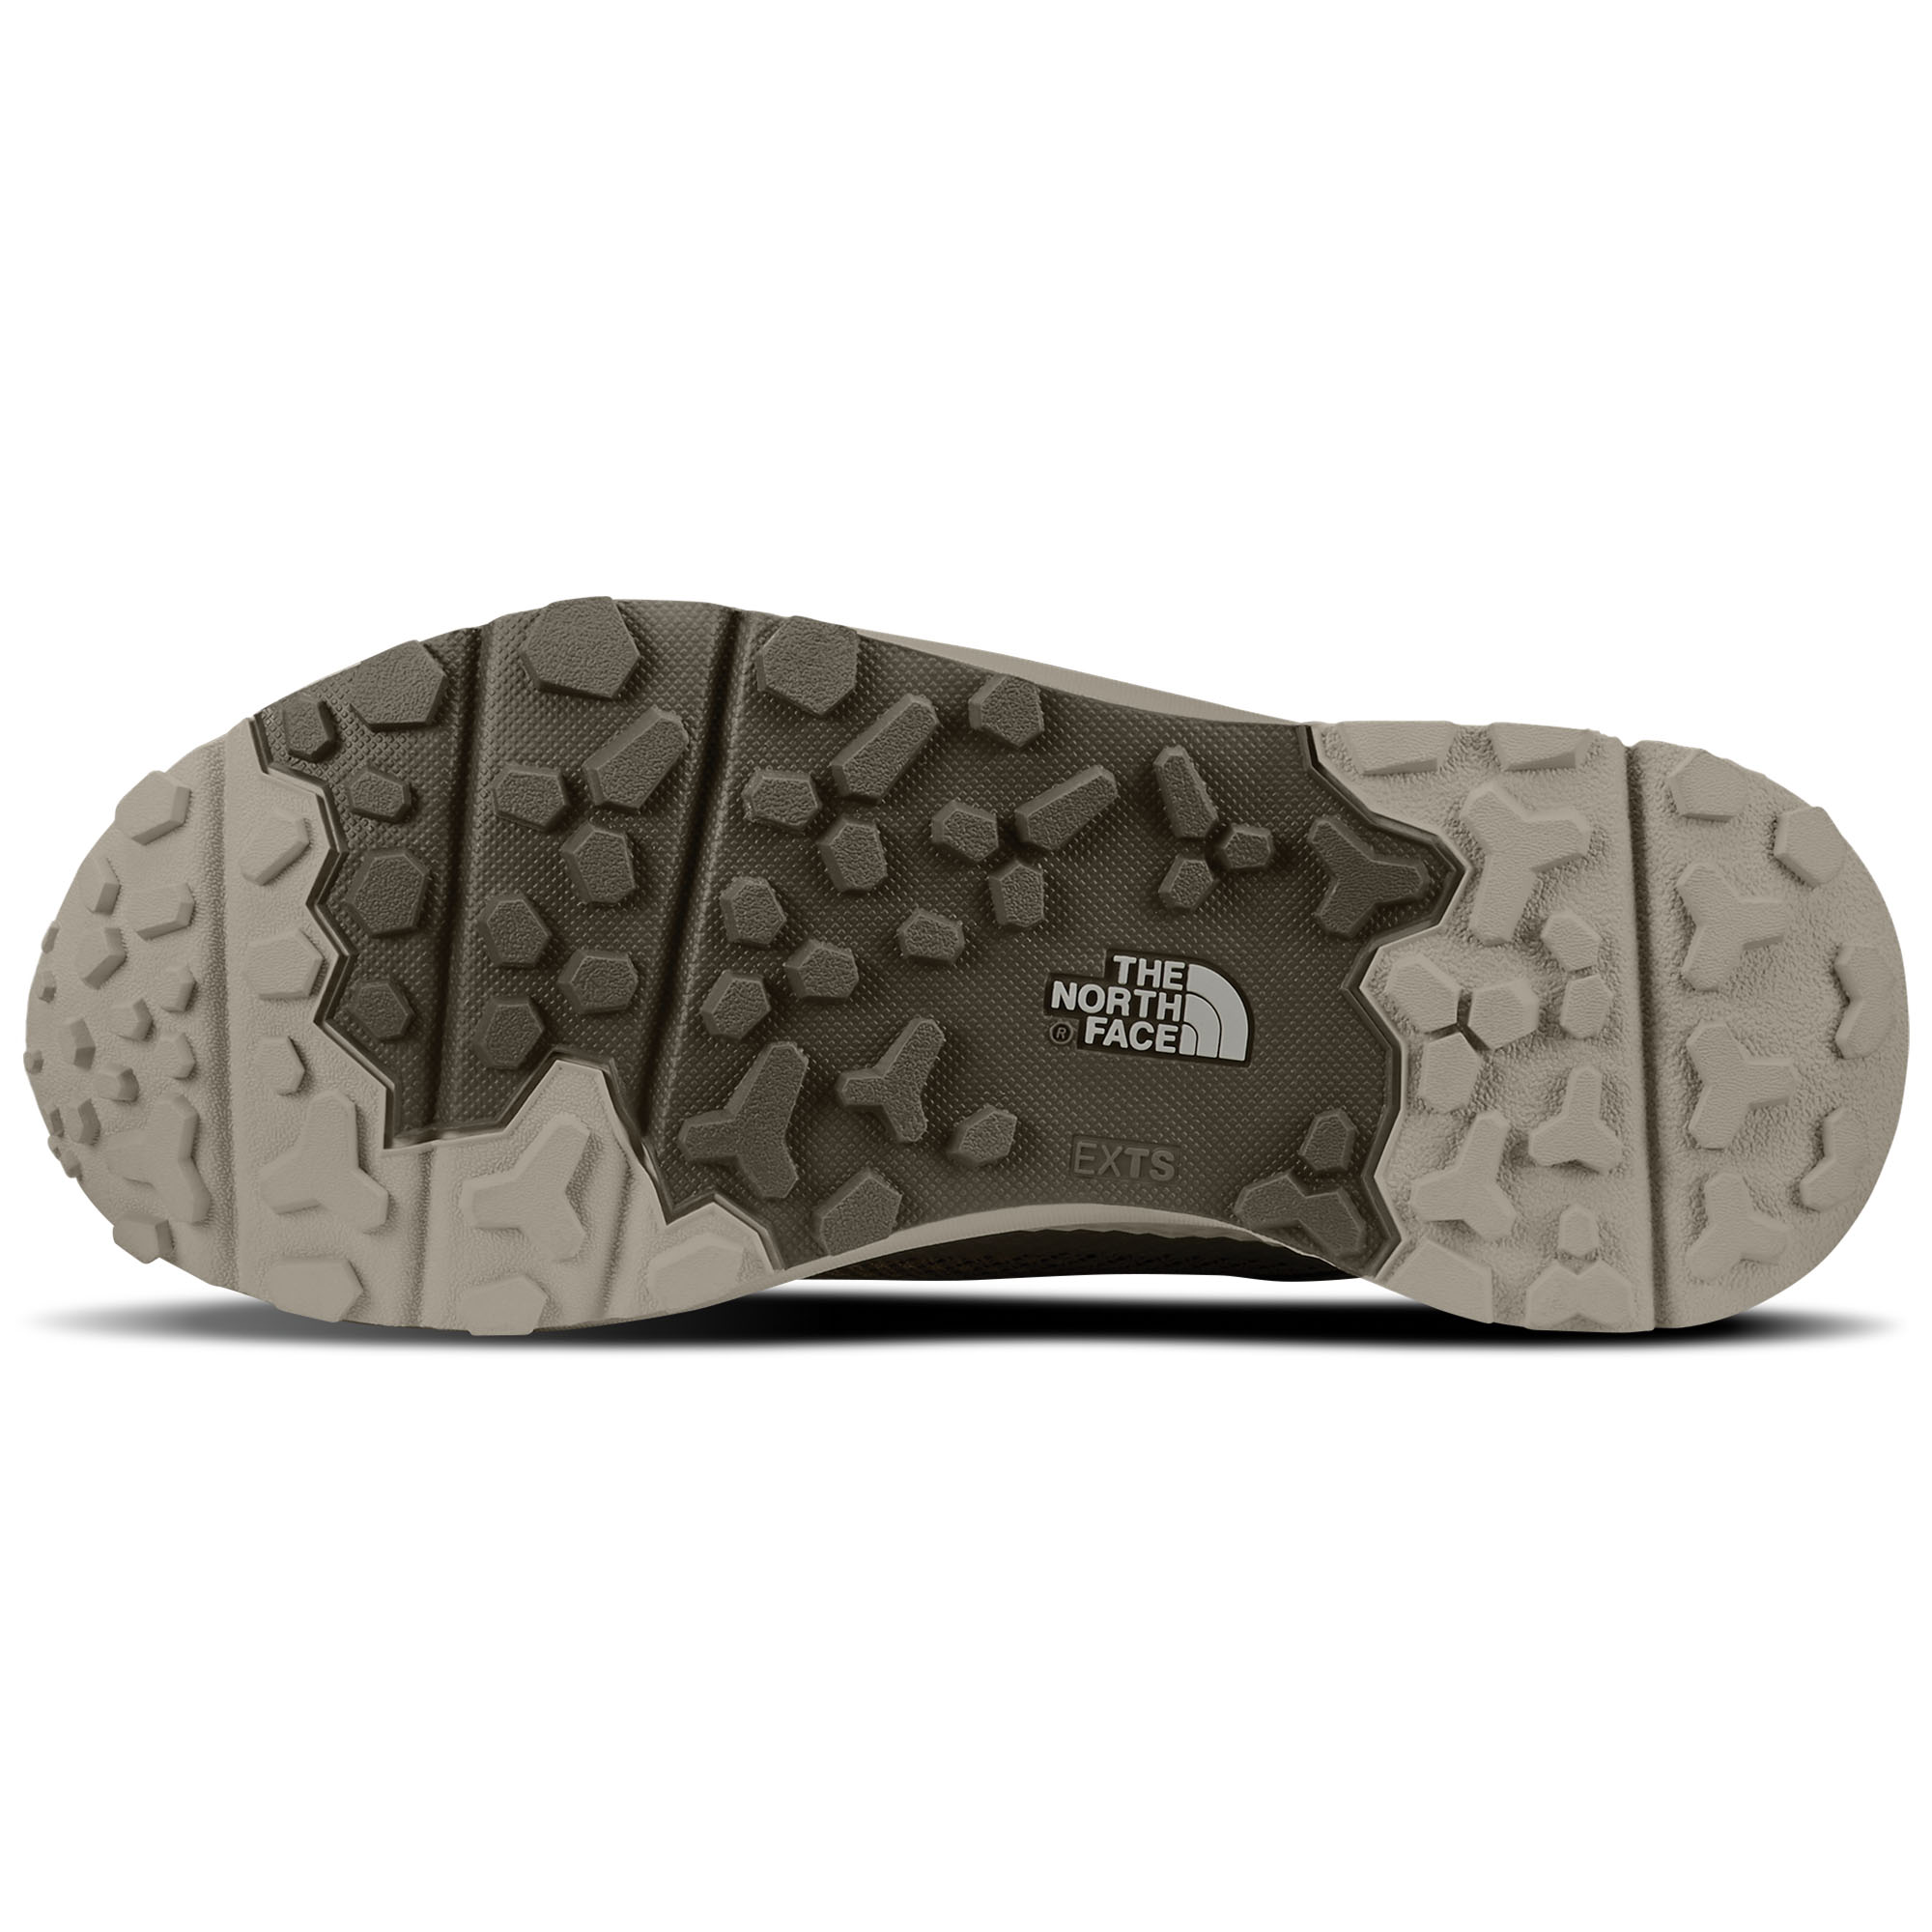 the north face women's vals waterproof hiking shoes